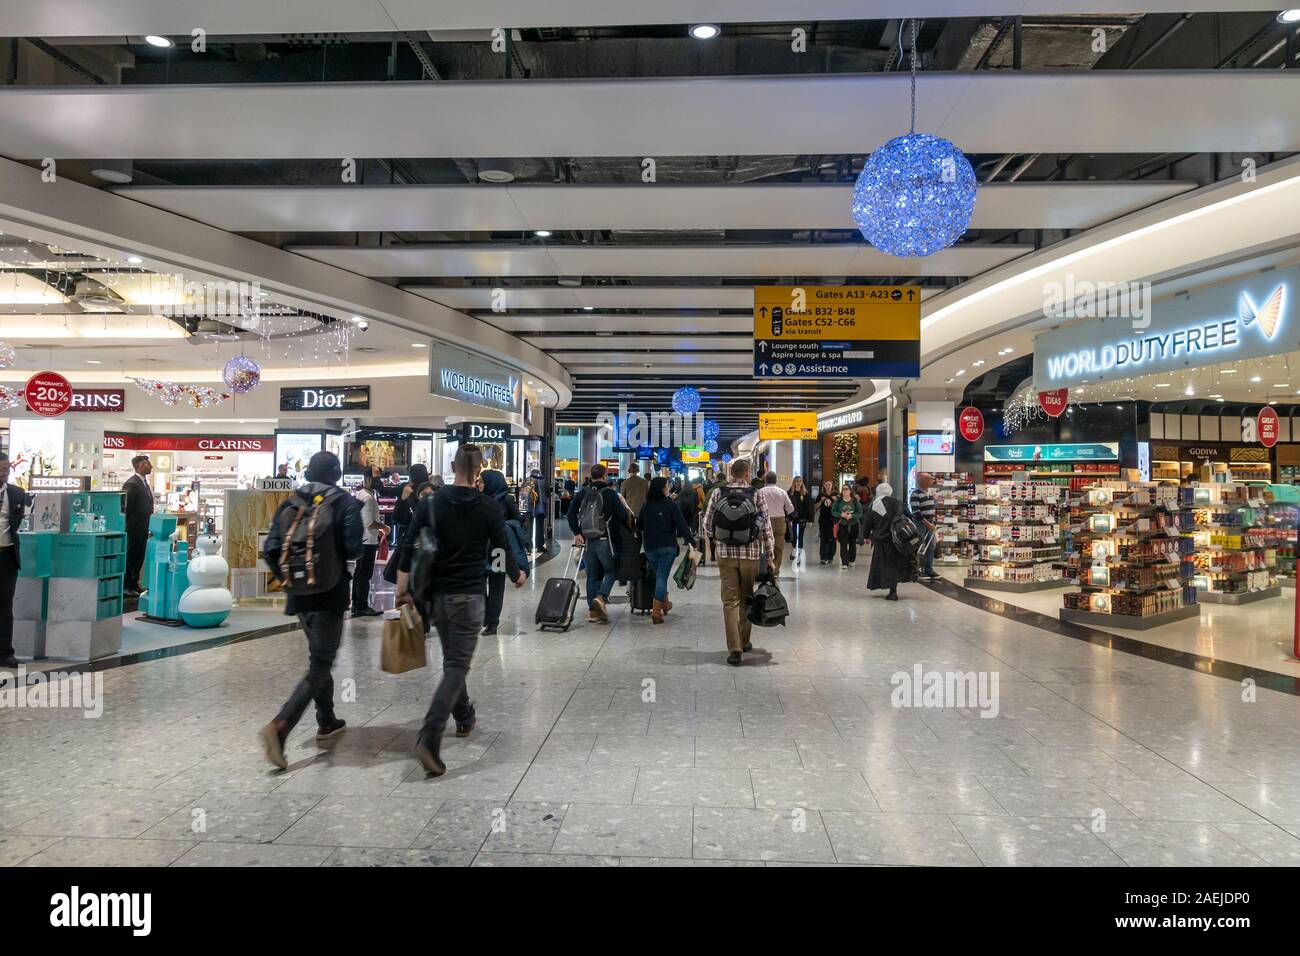 Duty free shopping in departures at Heathrow Airport Terminal 5 in London, UK Stock Photo